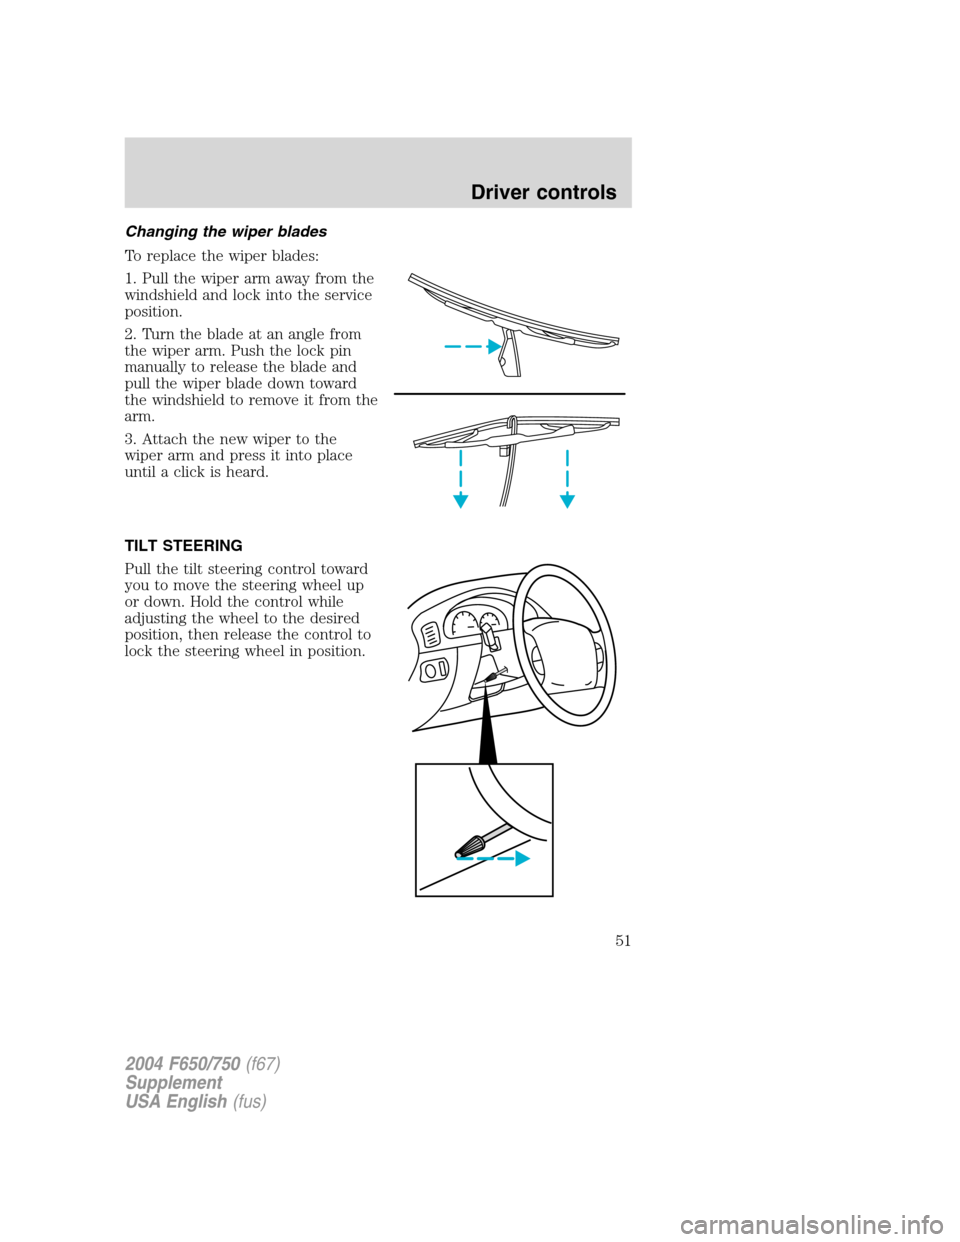 FORD F750 2004 11.G Owners Manual Changing the wiper blades
To replace the wiper blades:
1. Pull the wiper arm away from the
windshield and lock into the service
position.
2. Turn the blade at an angle from
the wiper arm. Push the loc